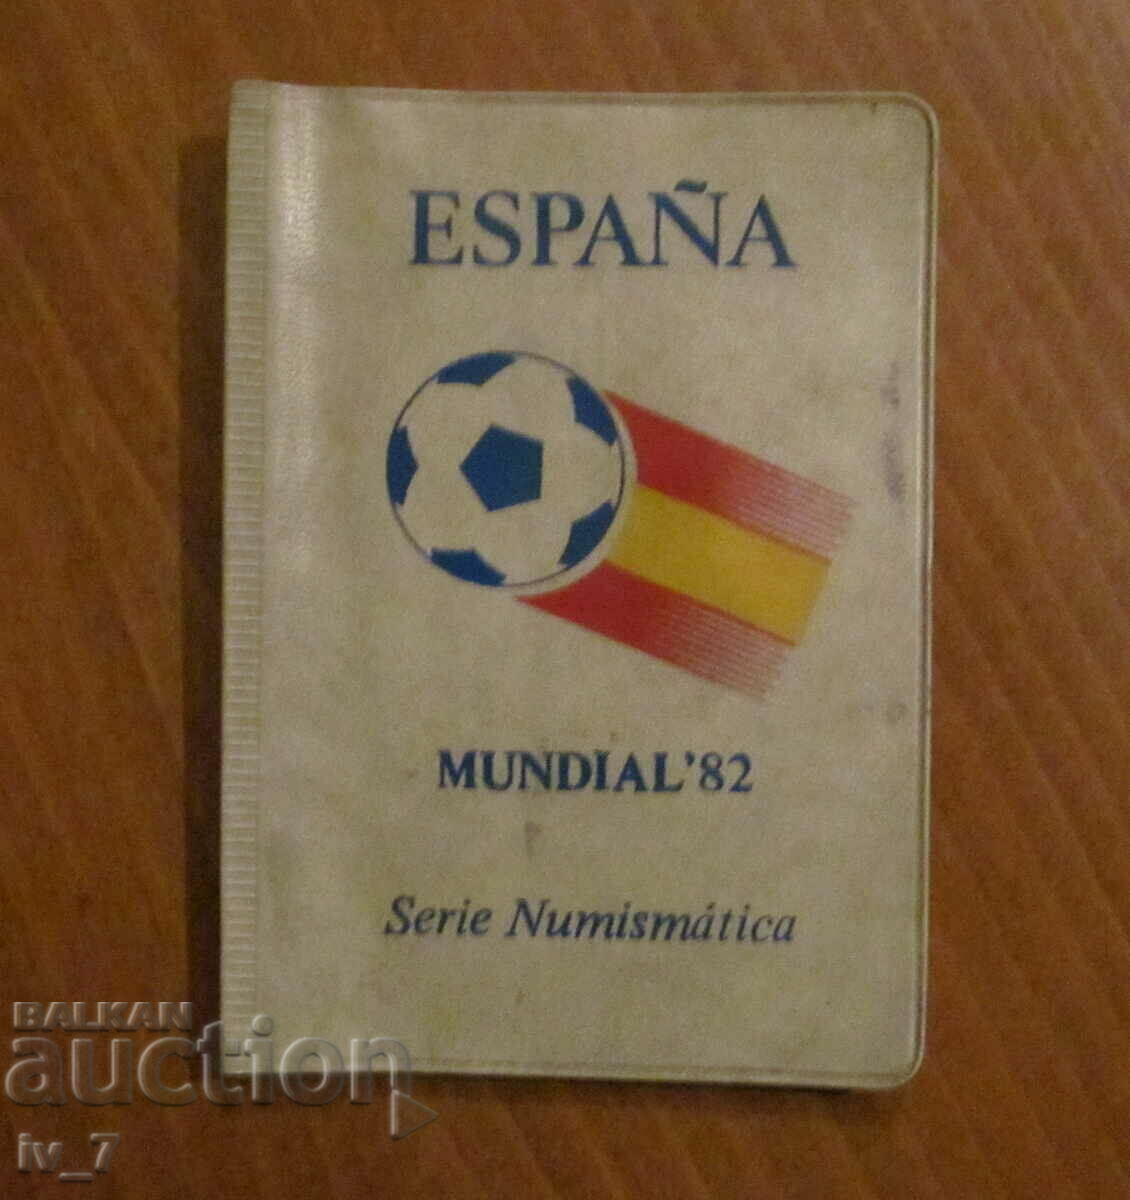 PESETTI SET - Issued for the FIFA World Cup SPAIN 82